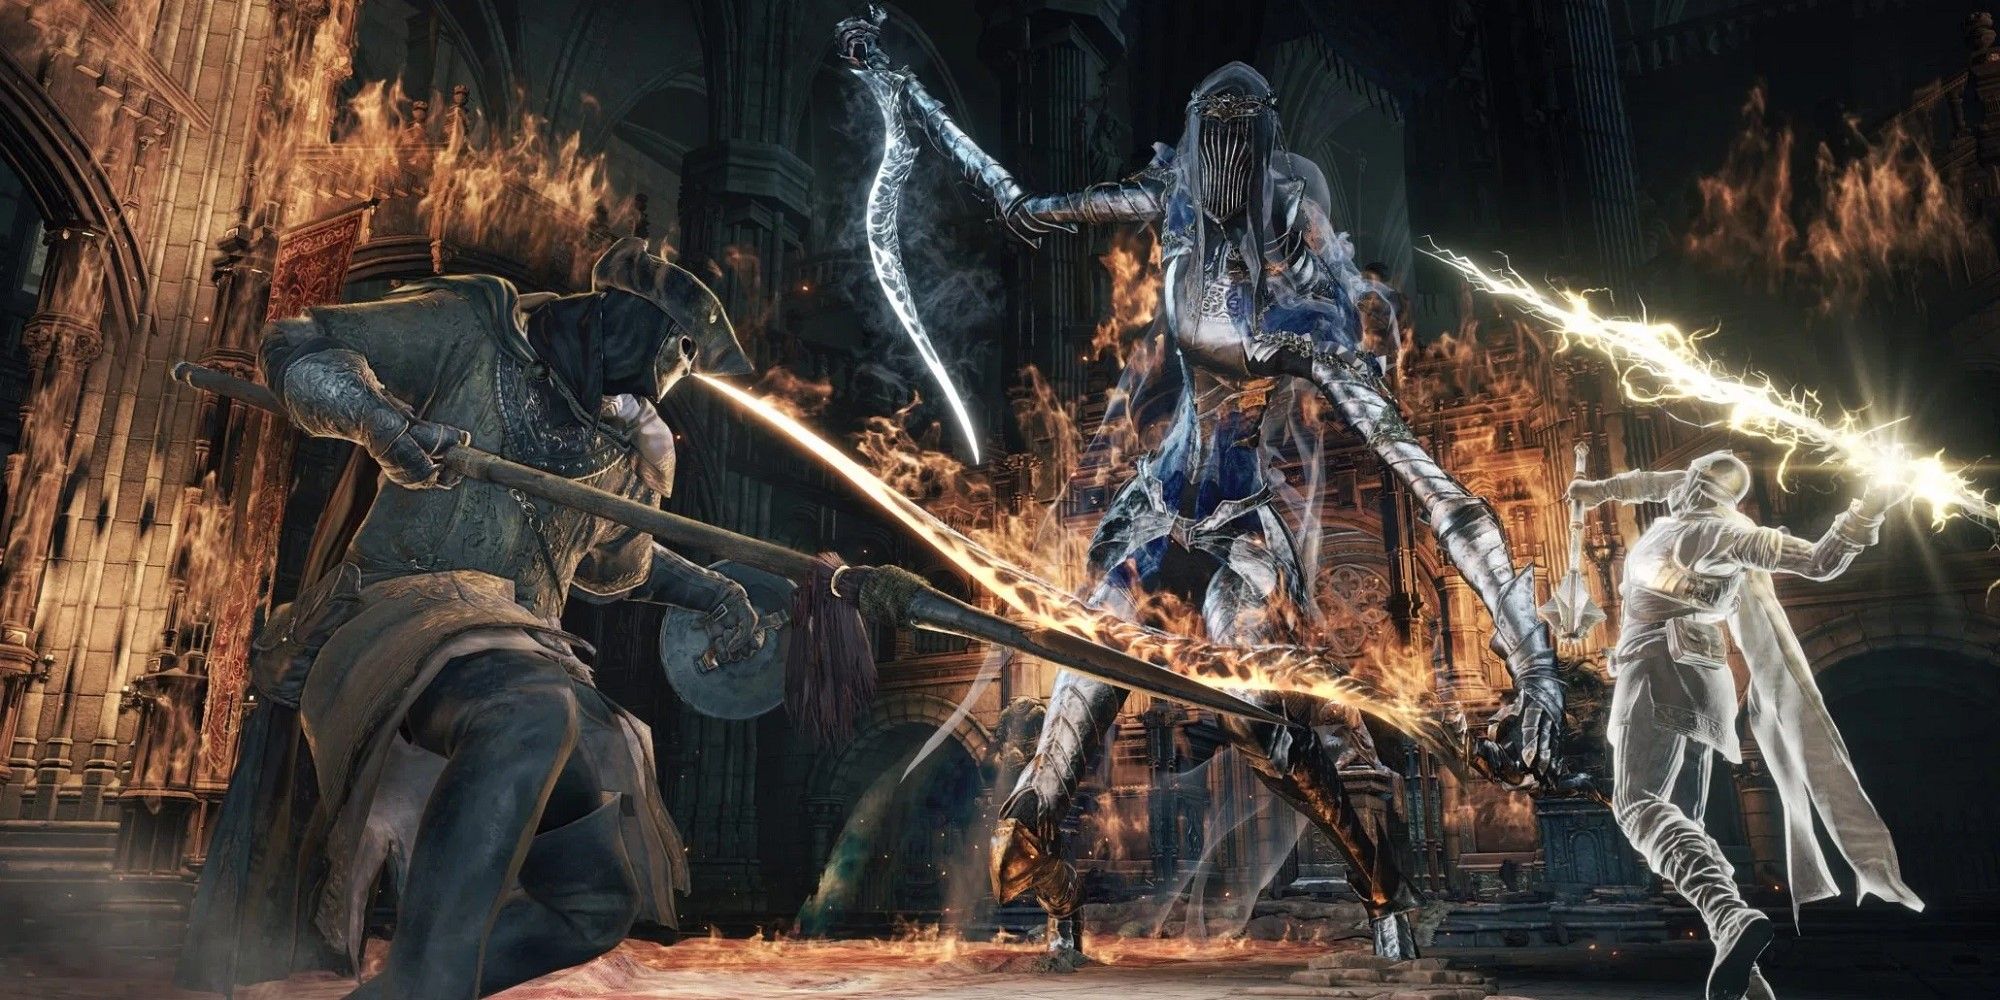 Play Dark Souls 3 as a Bloodborne Hunter with this mod